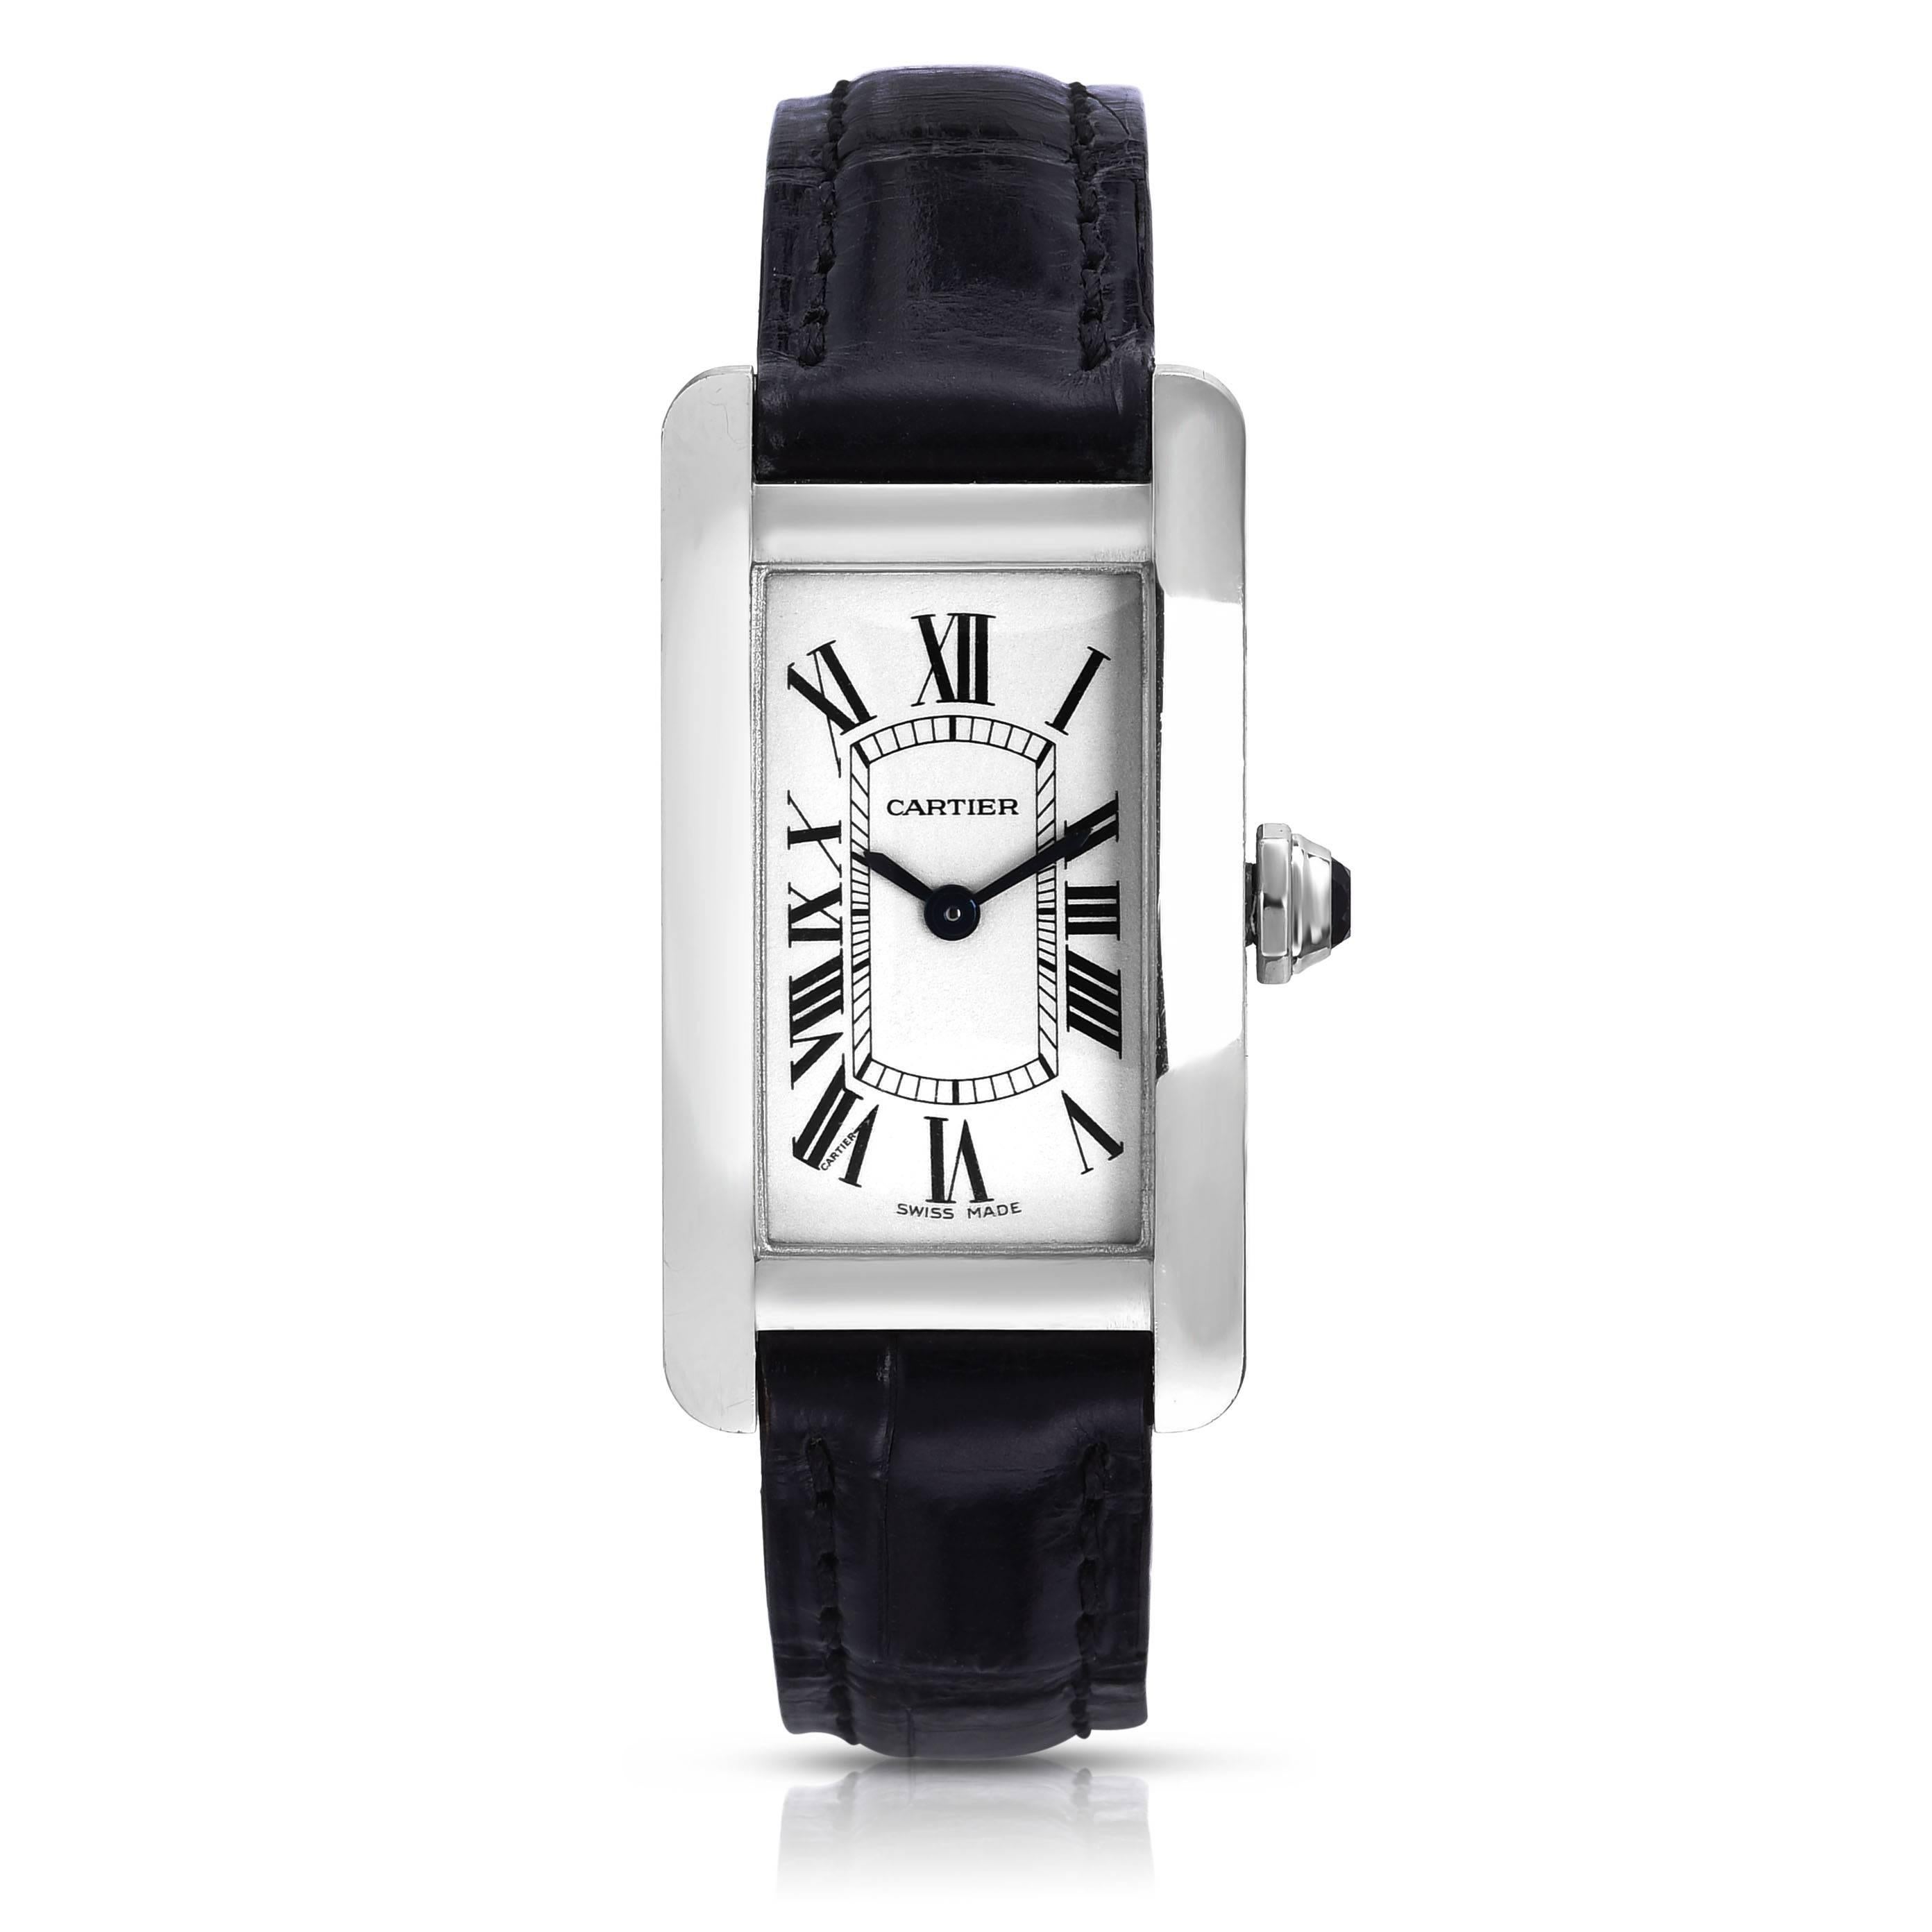 Cartier Tank Americain Ladies
Ladies - Case approx 19 mm x 35 mm
Reference 2489
Band / Bracelet Leather Cartier Strap Made in Paris w/ Cartier buckle
Movement Quartz movement
Dial	White dial w/Roman numerals 
Bezel	18K Gold White